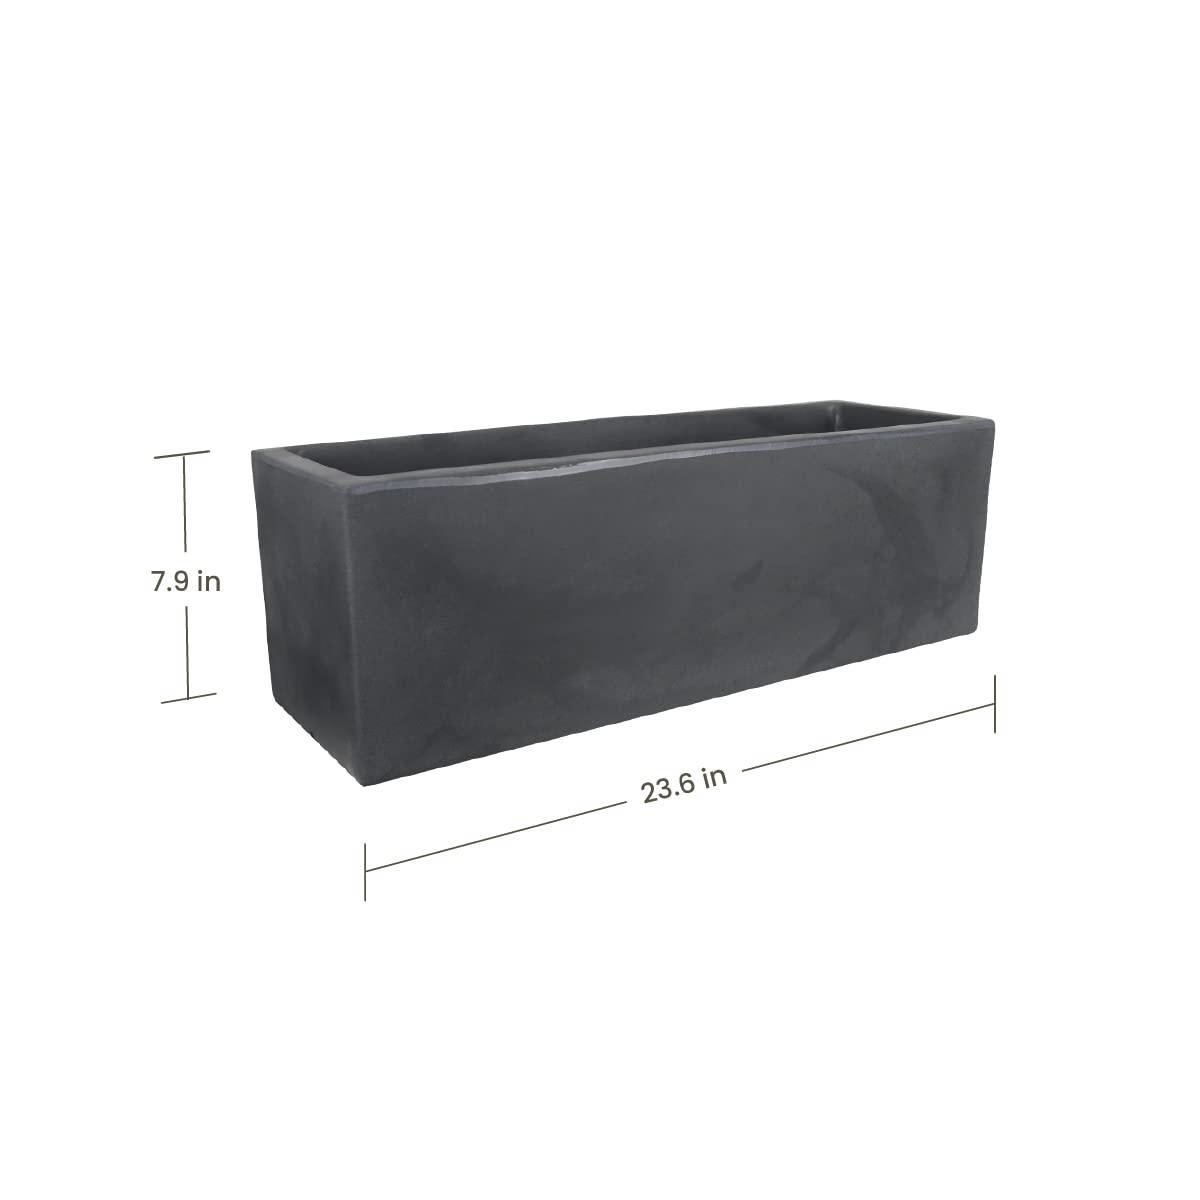 Ecobo 7.9 inches Eco-Friendly Rectangular Planter Indoor/Outdoor use, Durable, Versatile & Lightweight, Designed by Brazilian Artisans, Contemporary All-Weather Design – Black - image 4 of 4